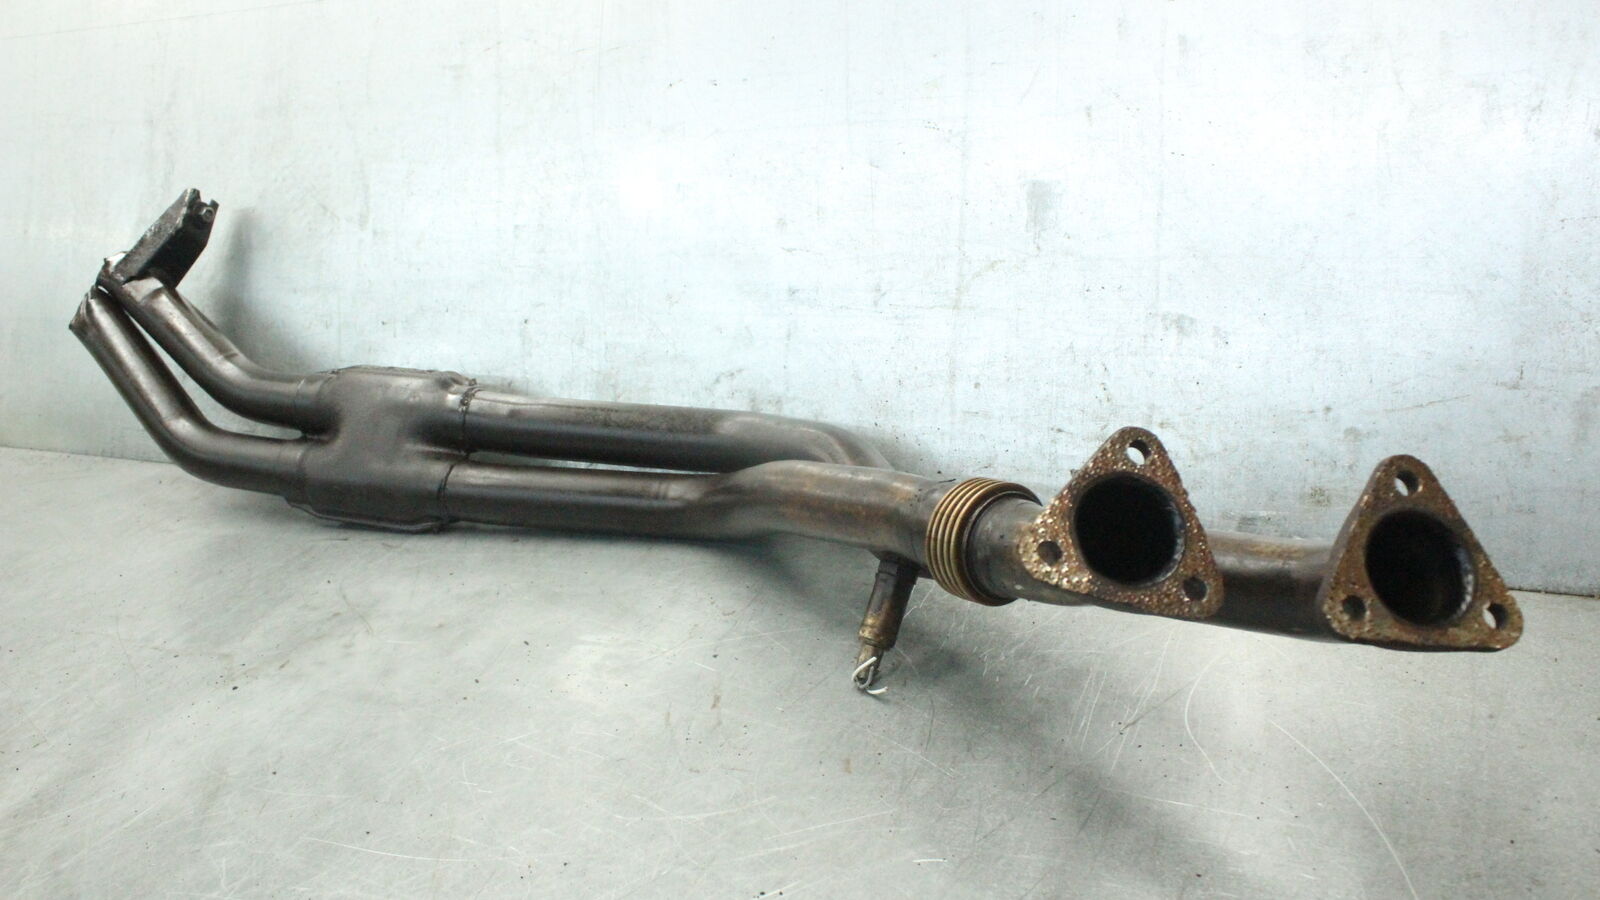 BMW E30 325i 325is M20 EXHAUST HEADER DOWNPIPE HEADER COLLECTOR OEM LM039